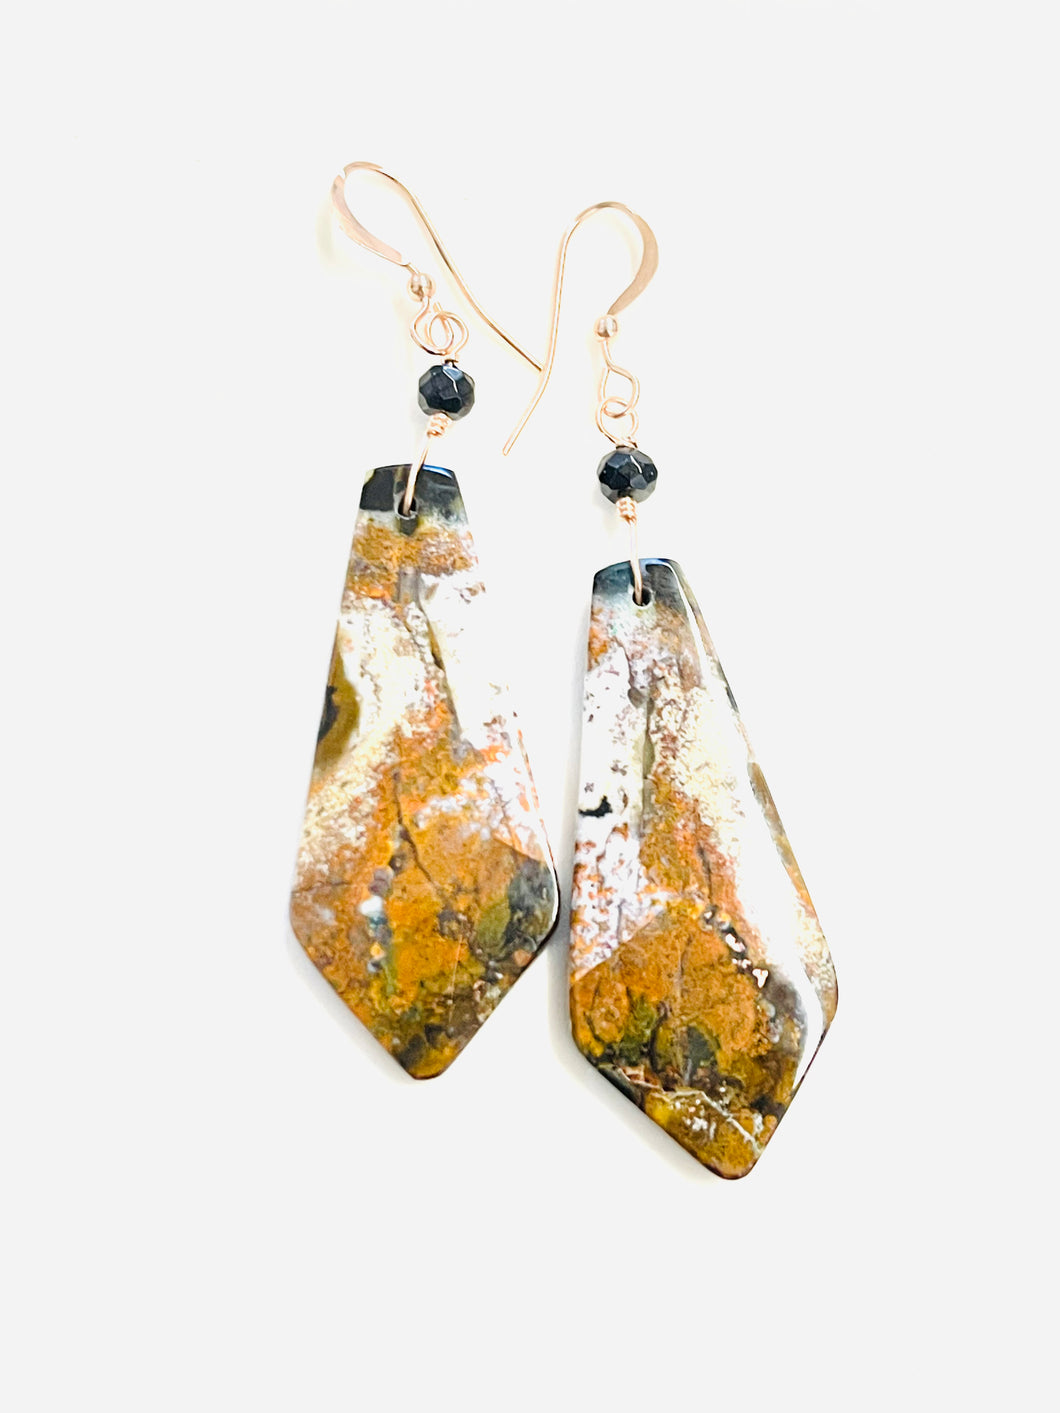 Earrings with long natural copper